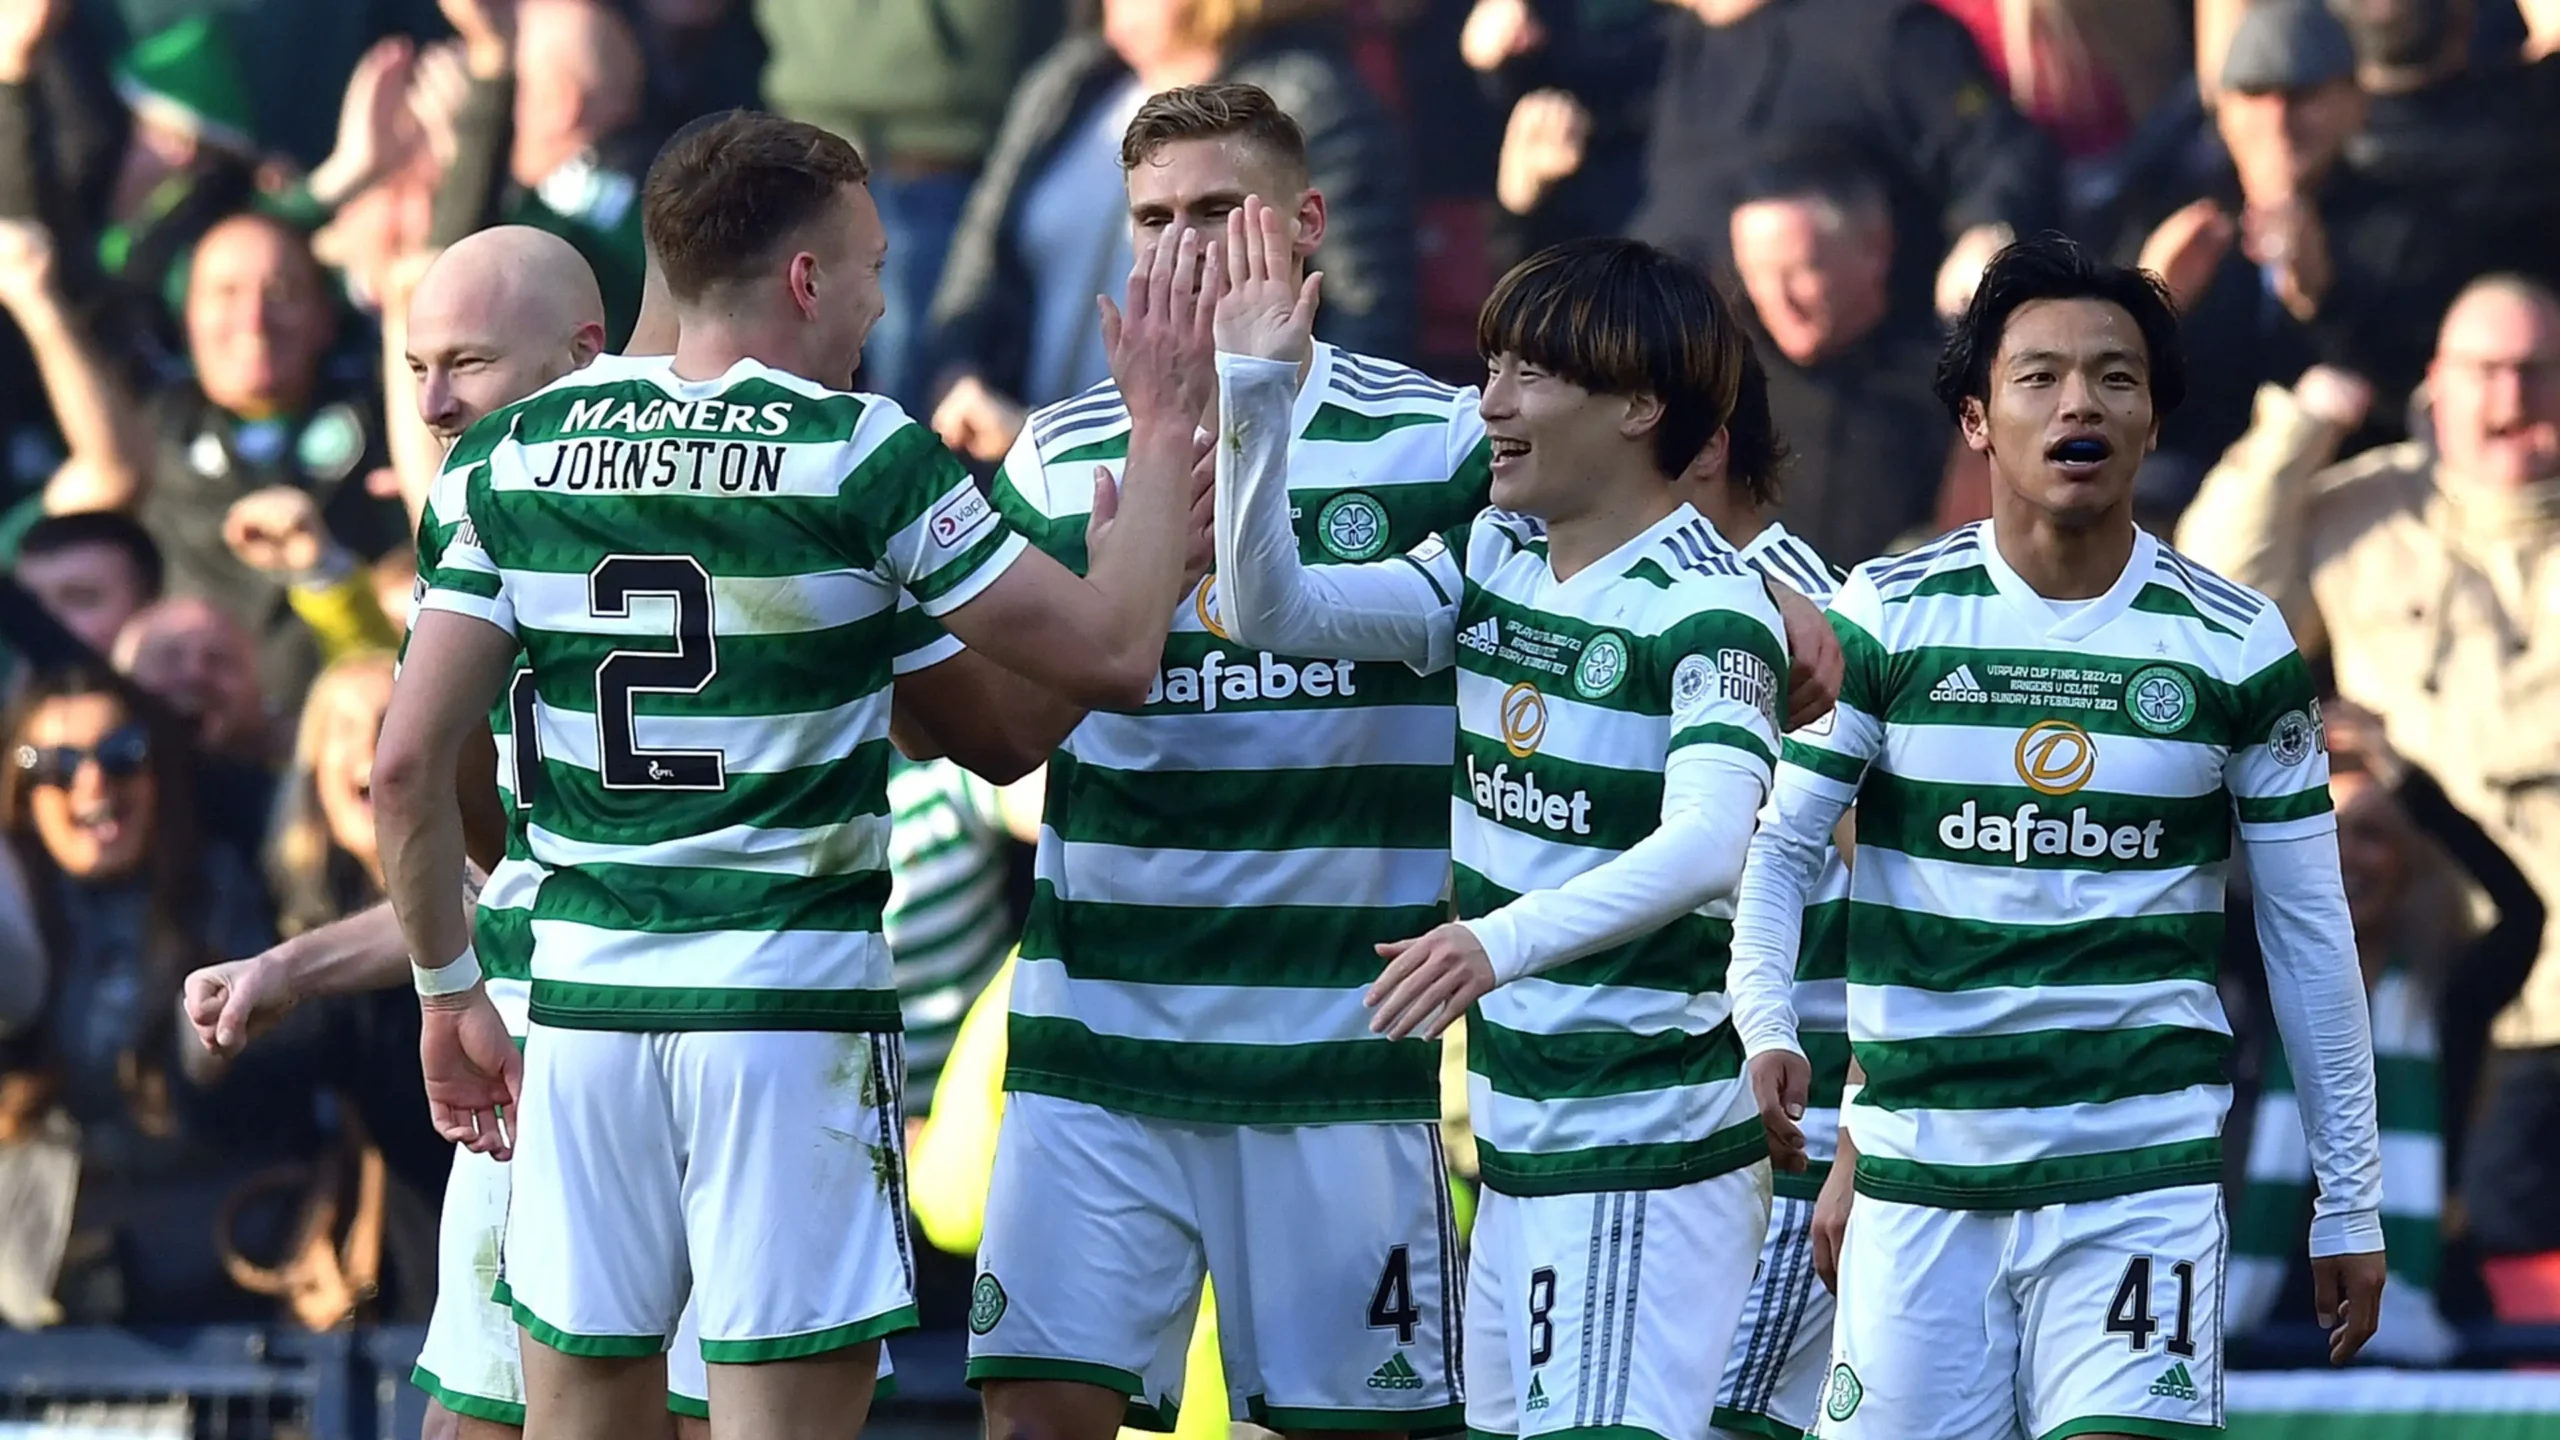 Celtic news: Hoops send scout to target ‘quick’ scout to find £3,000-a-week striker